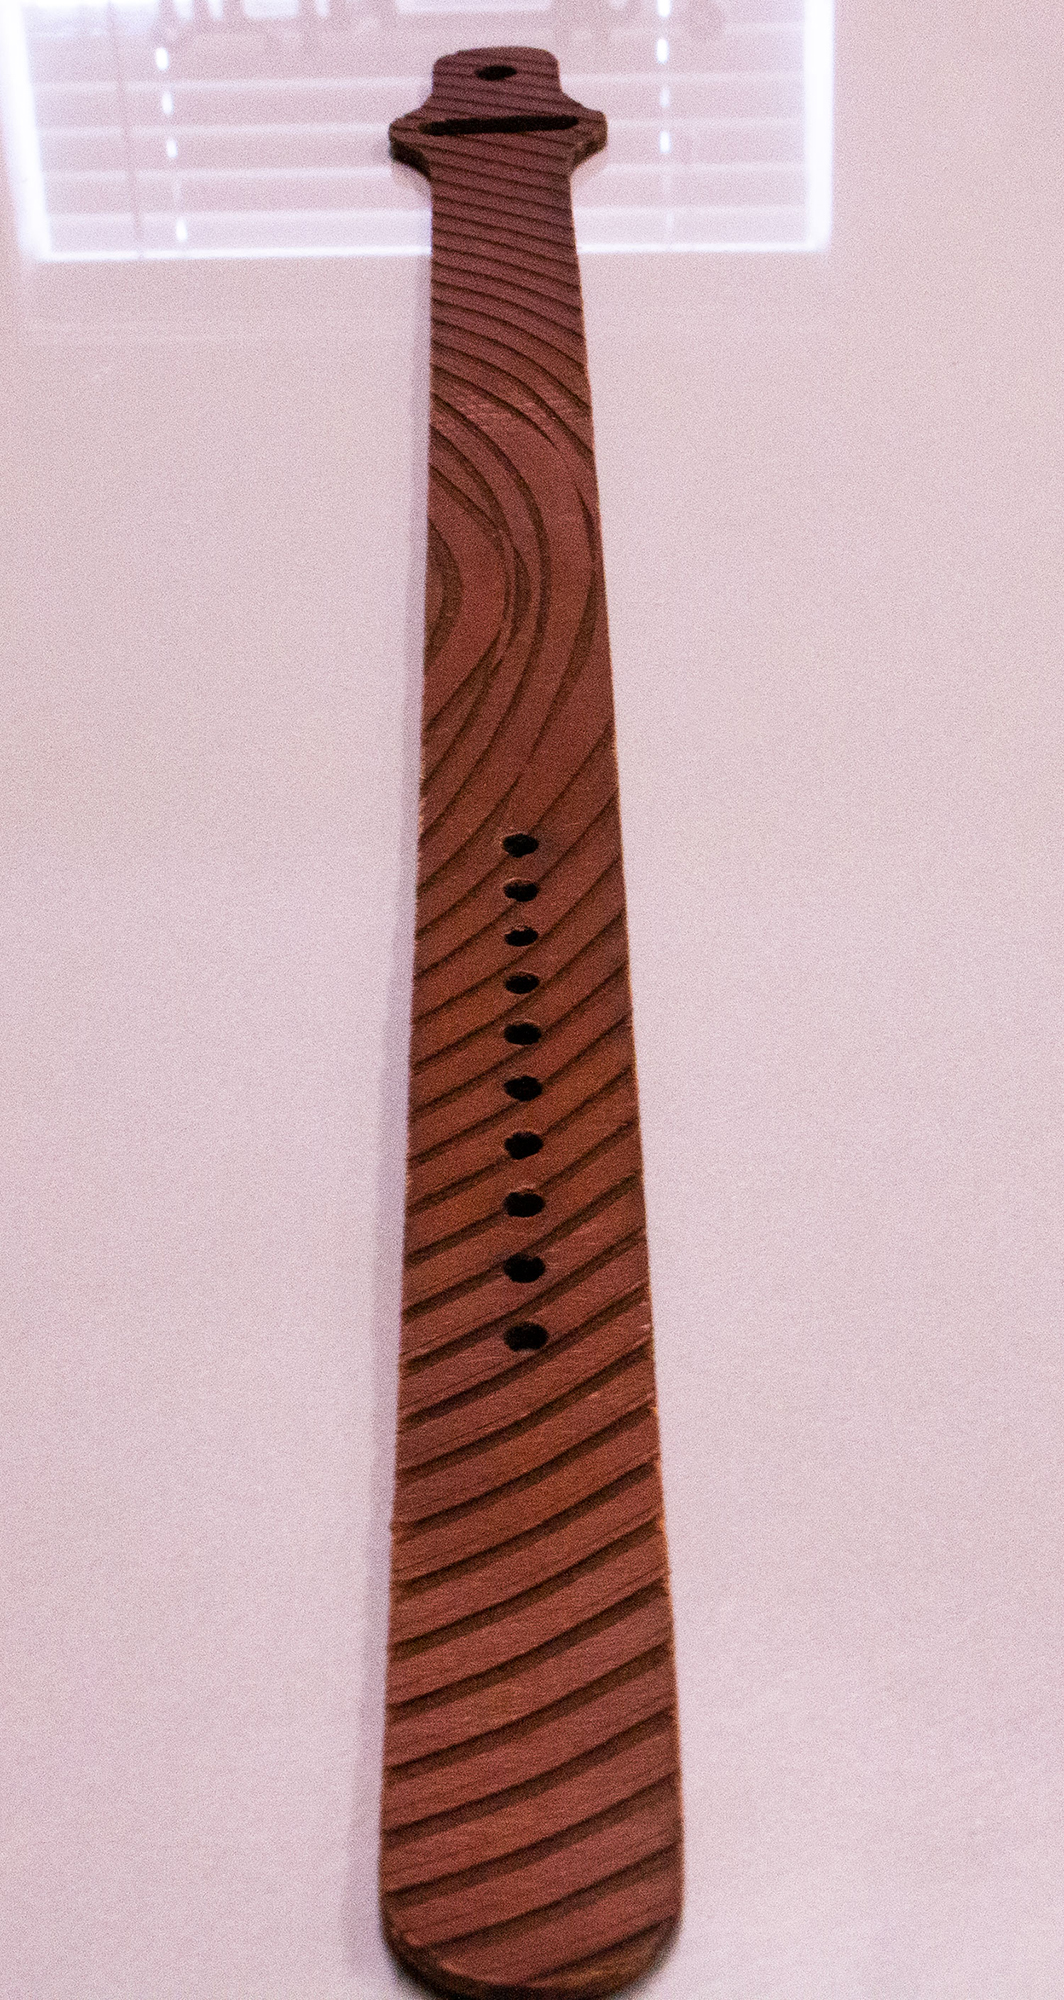 leather watch band that was laser cut with laser patterns on it.